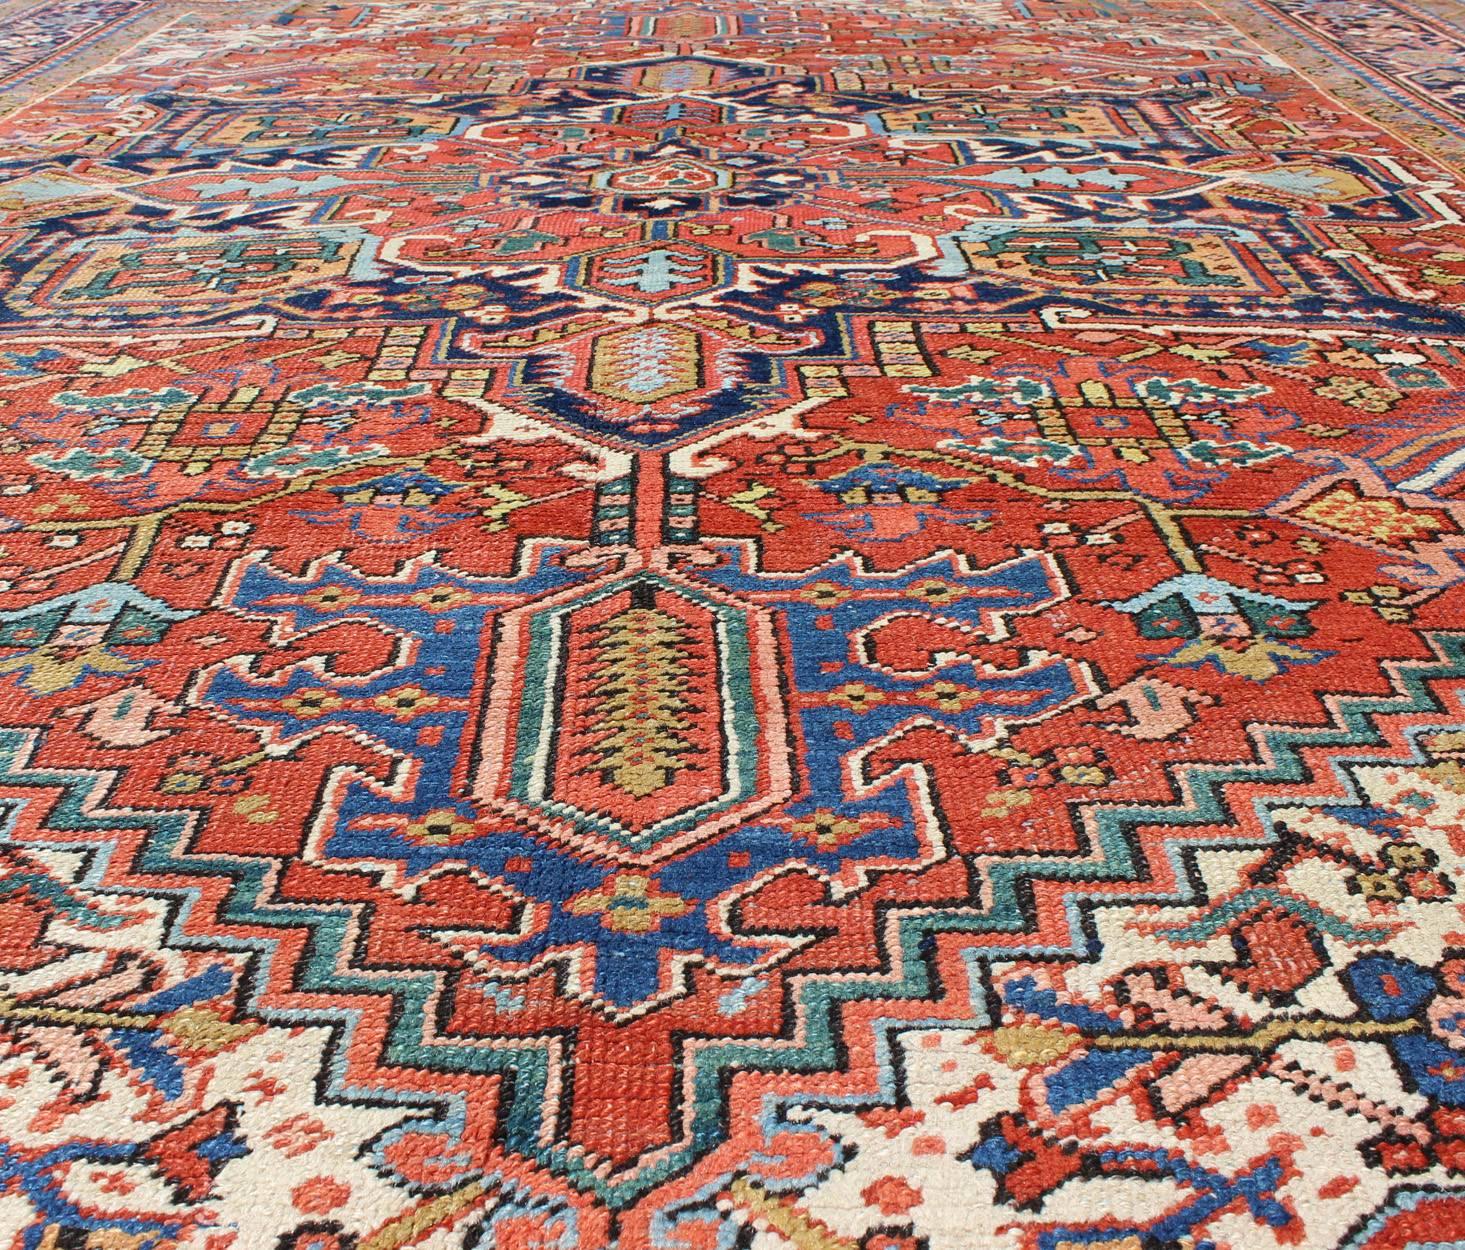 Early 20th Century Antique Colorful Persian Heriz Rug with Geometric Patterns and Intricate Design For Sale